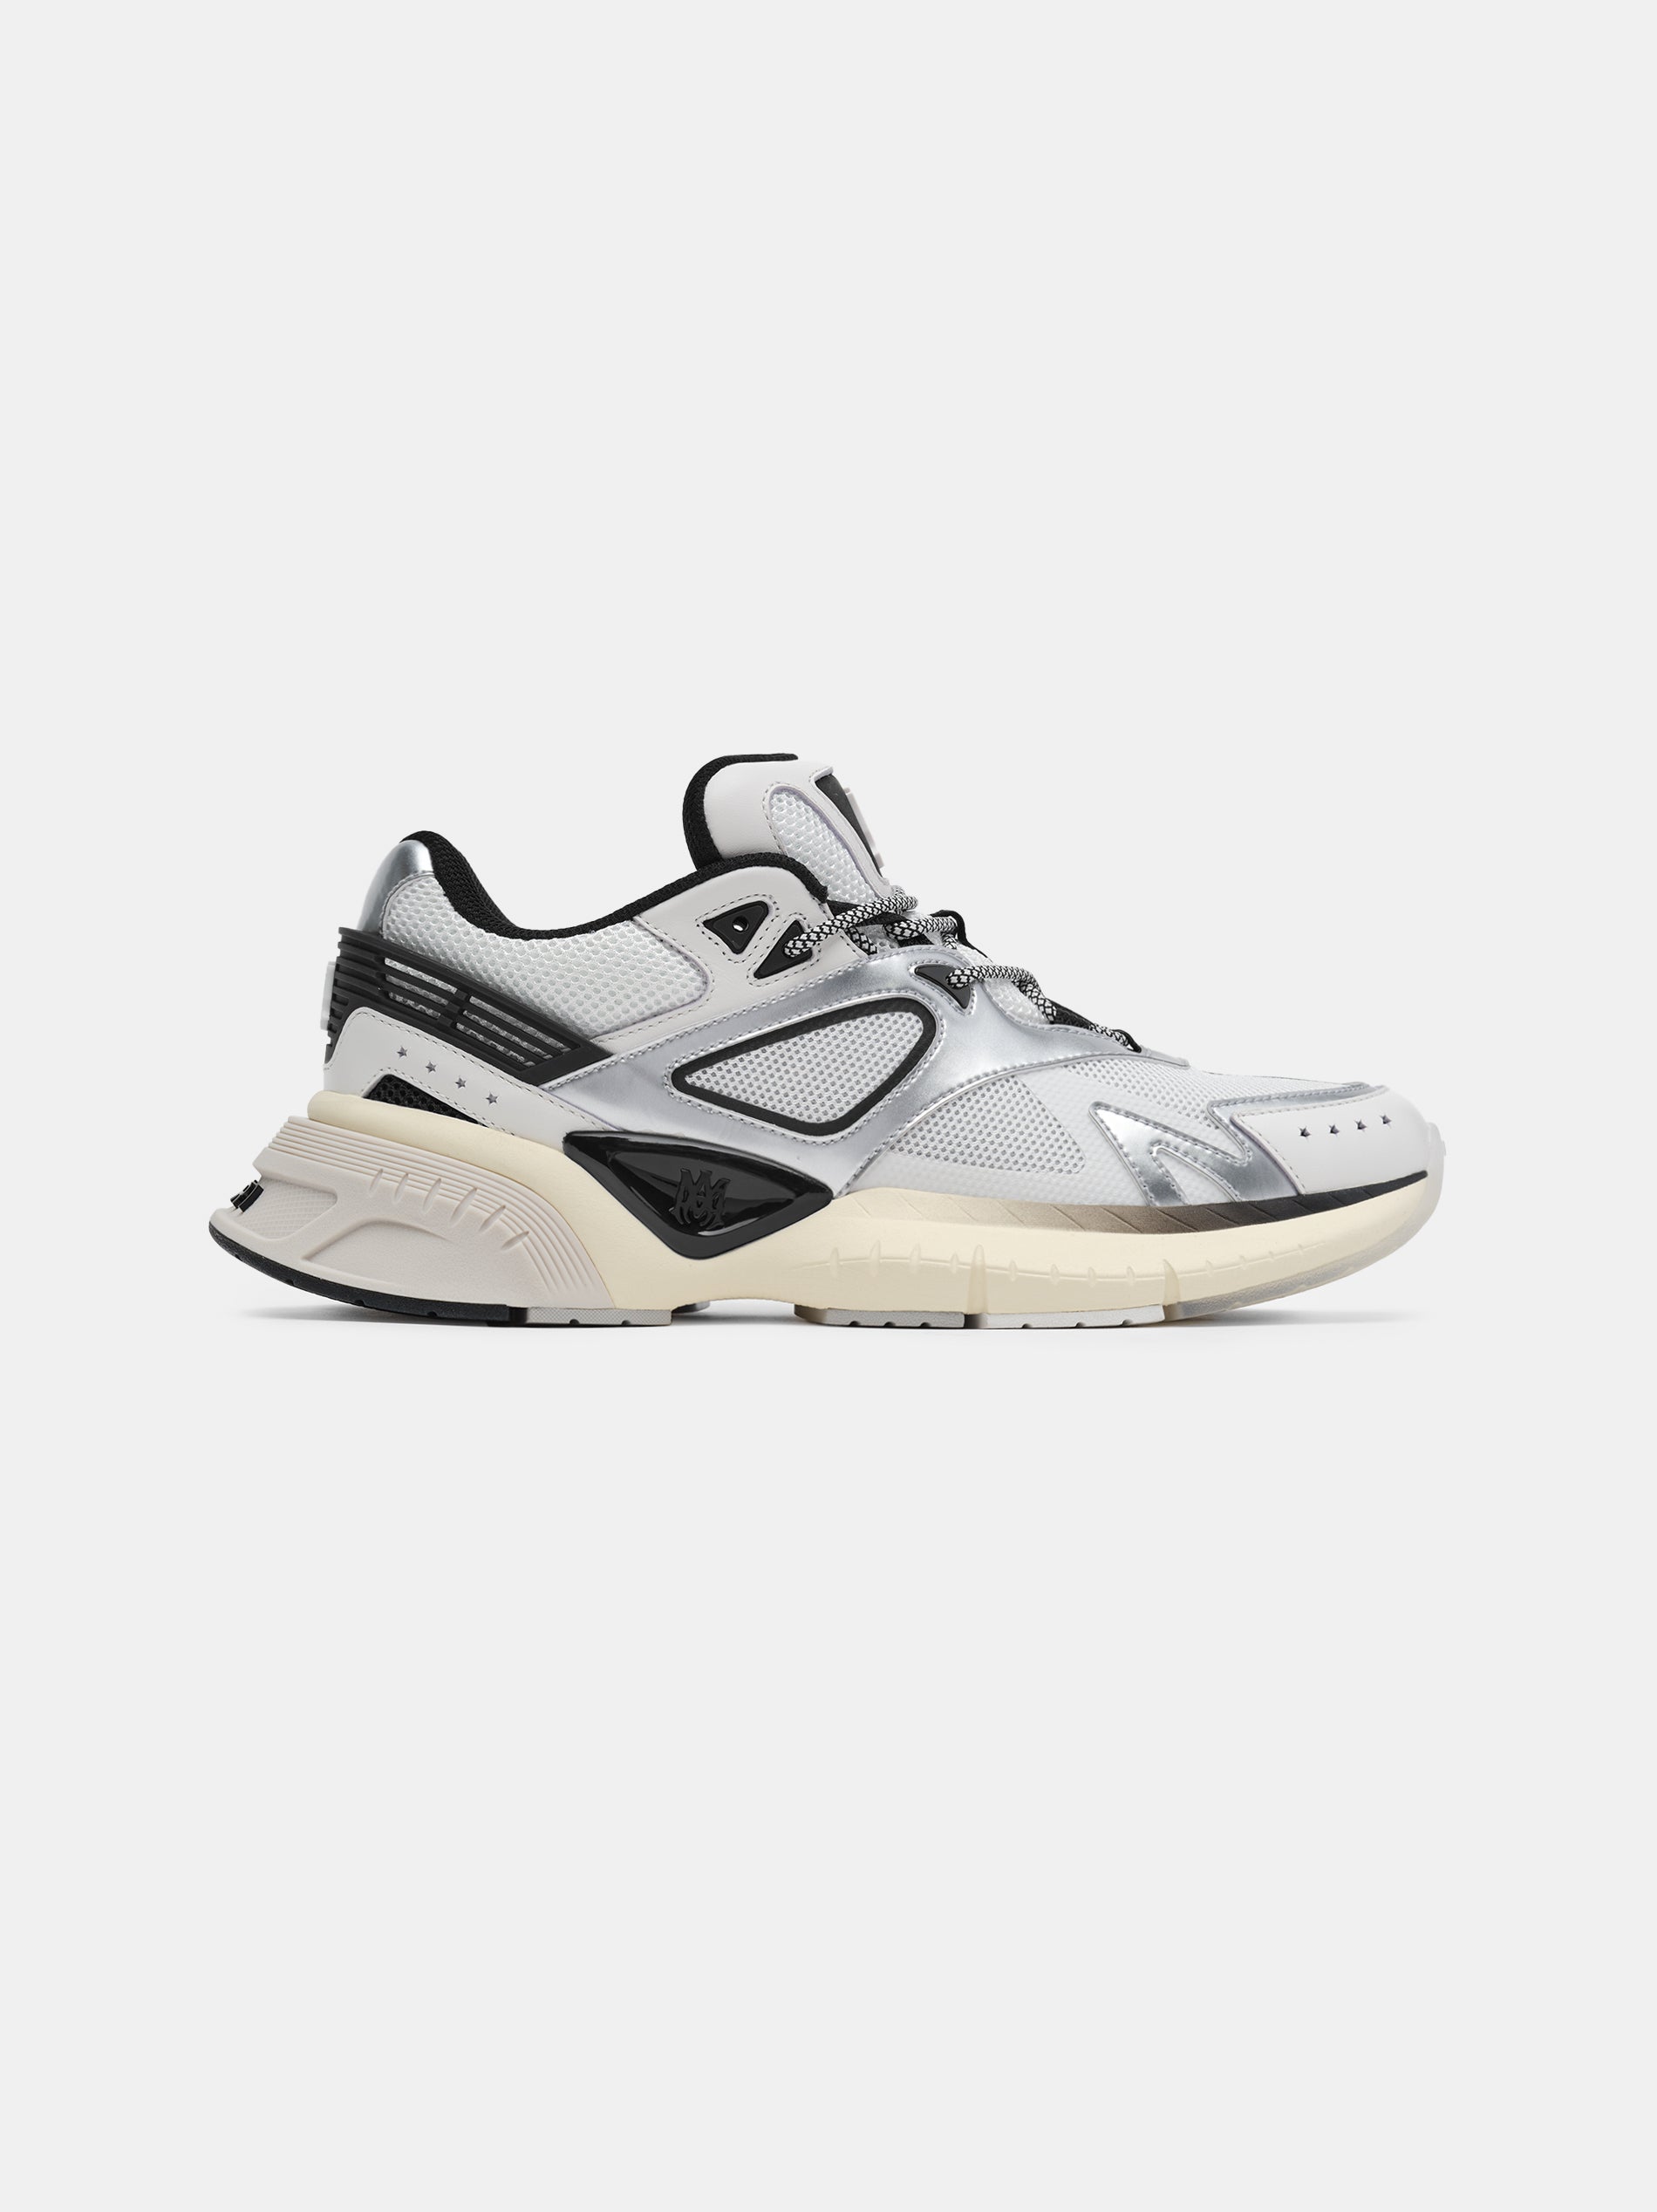 Product WOMEN - MA RUNNER - Black White Silver featured image